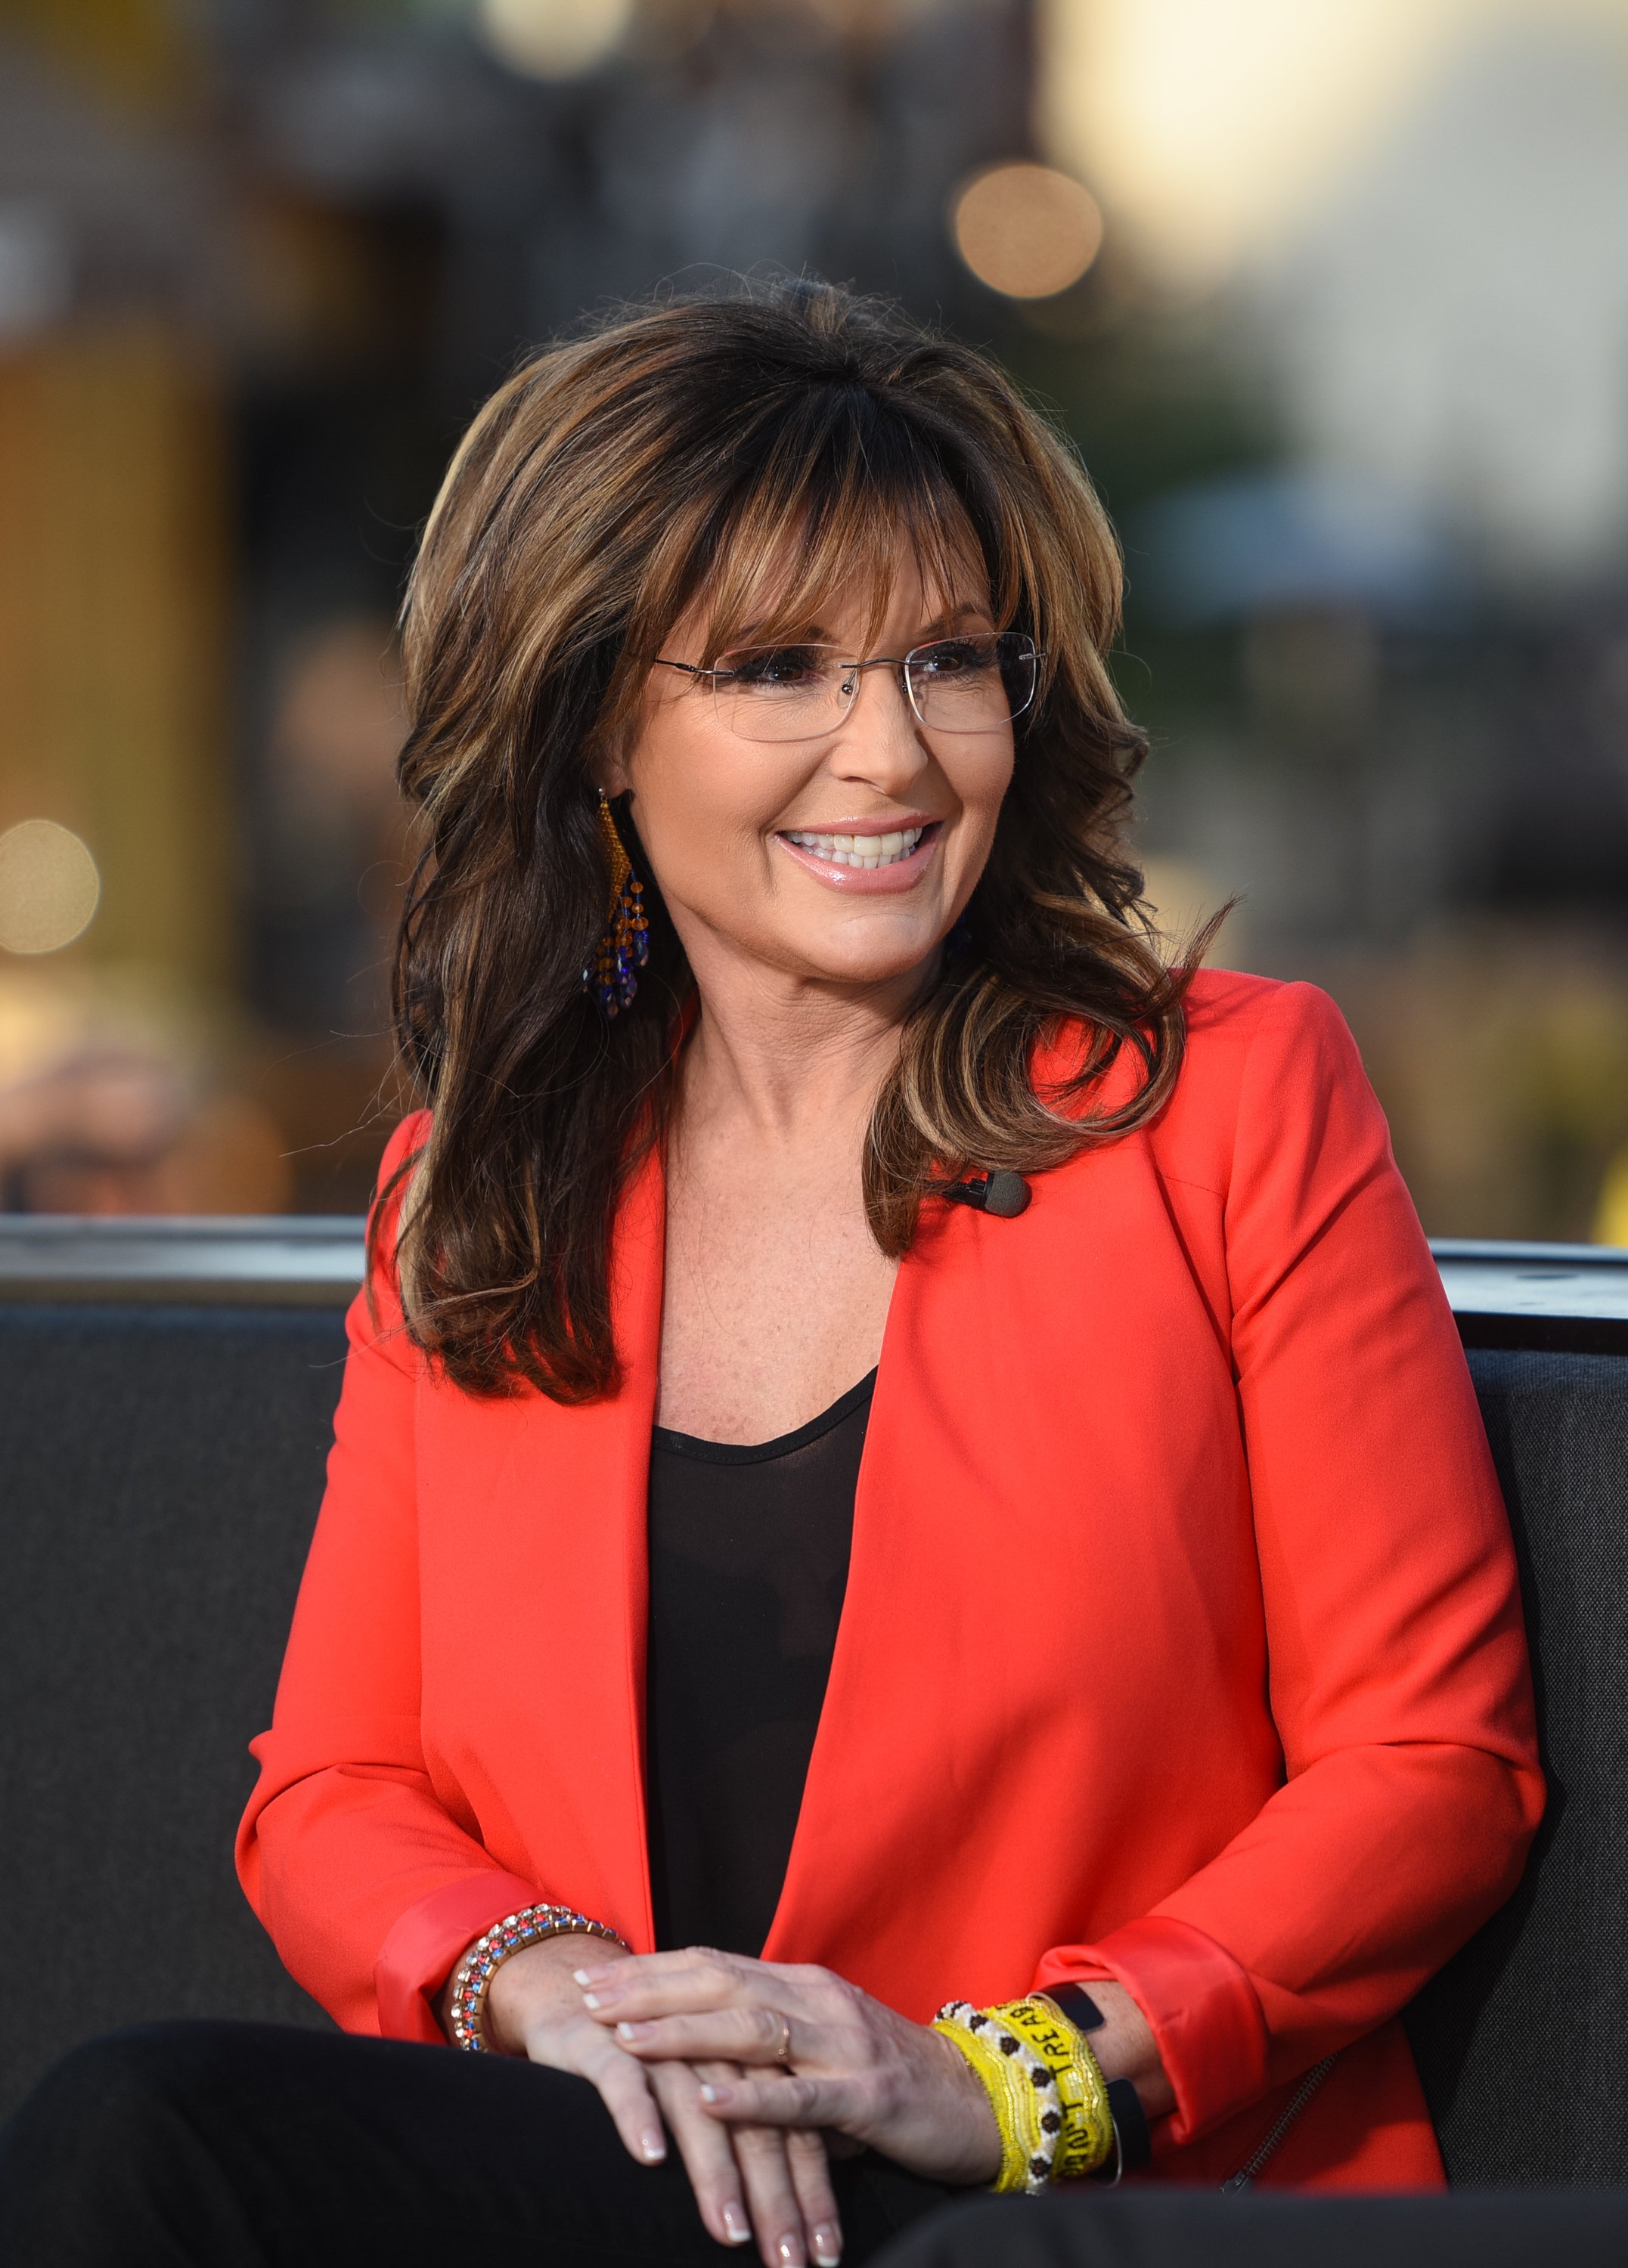 Sarah Palin pictured at "Extra" at Universal Studios Hollywood, 2015, California. | Photo: Getty Images